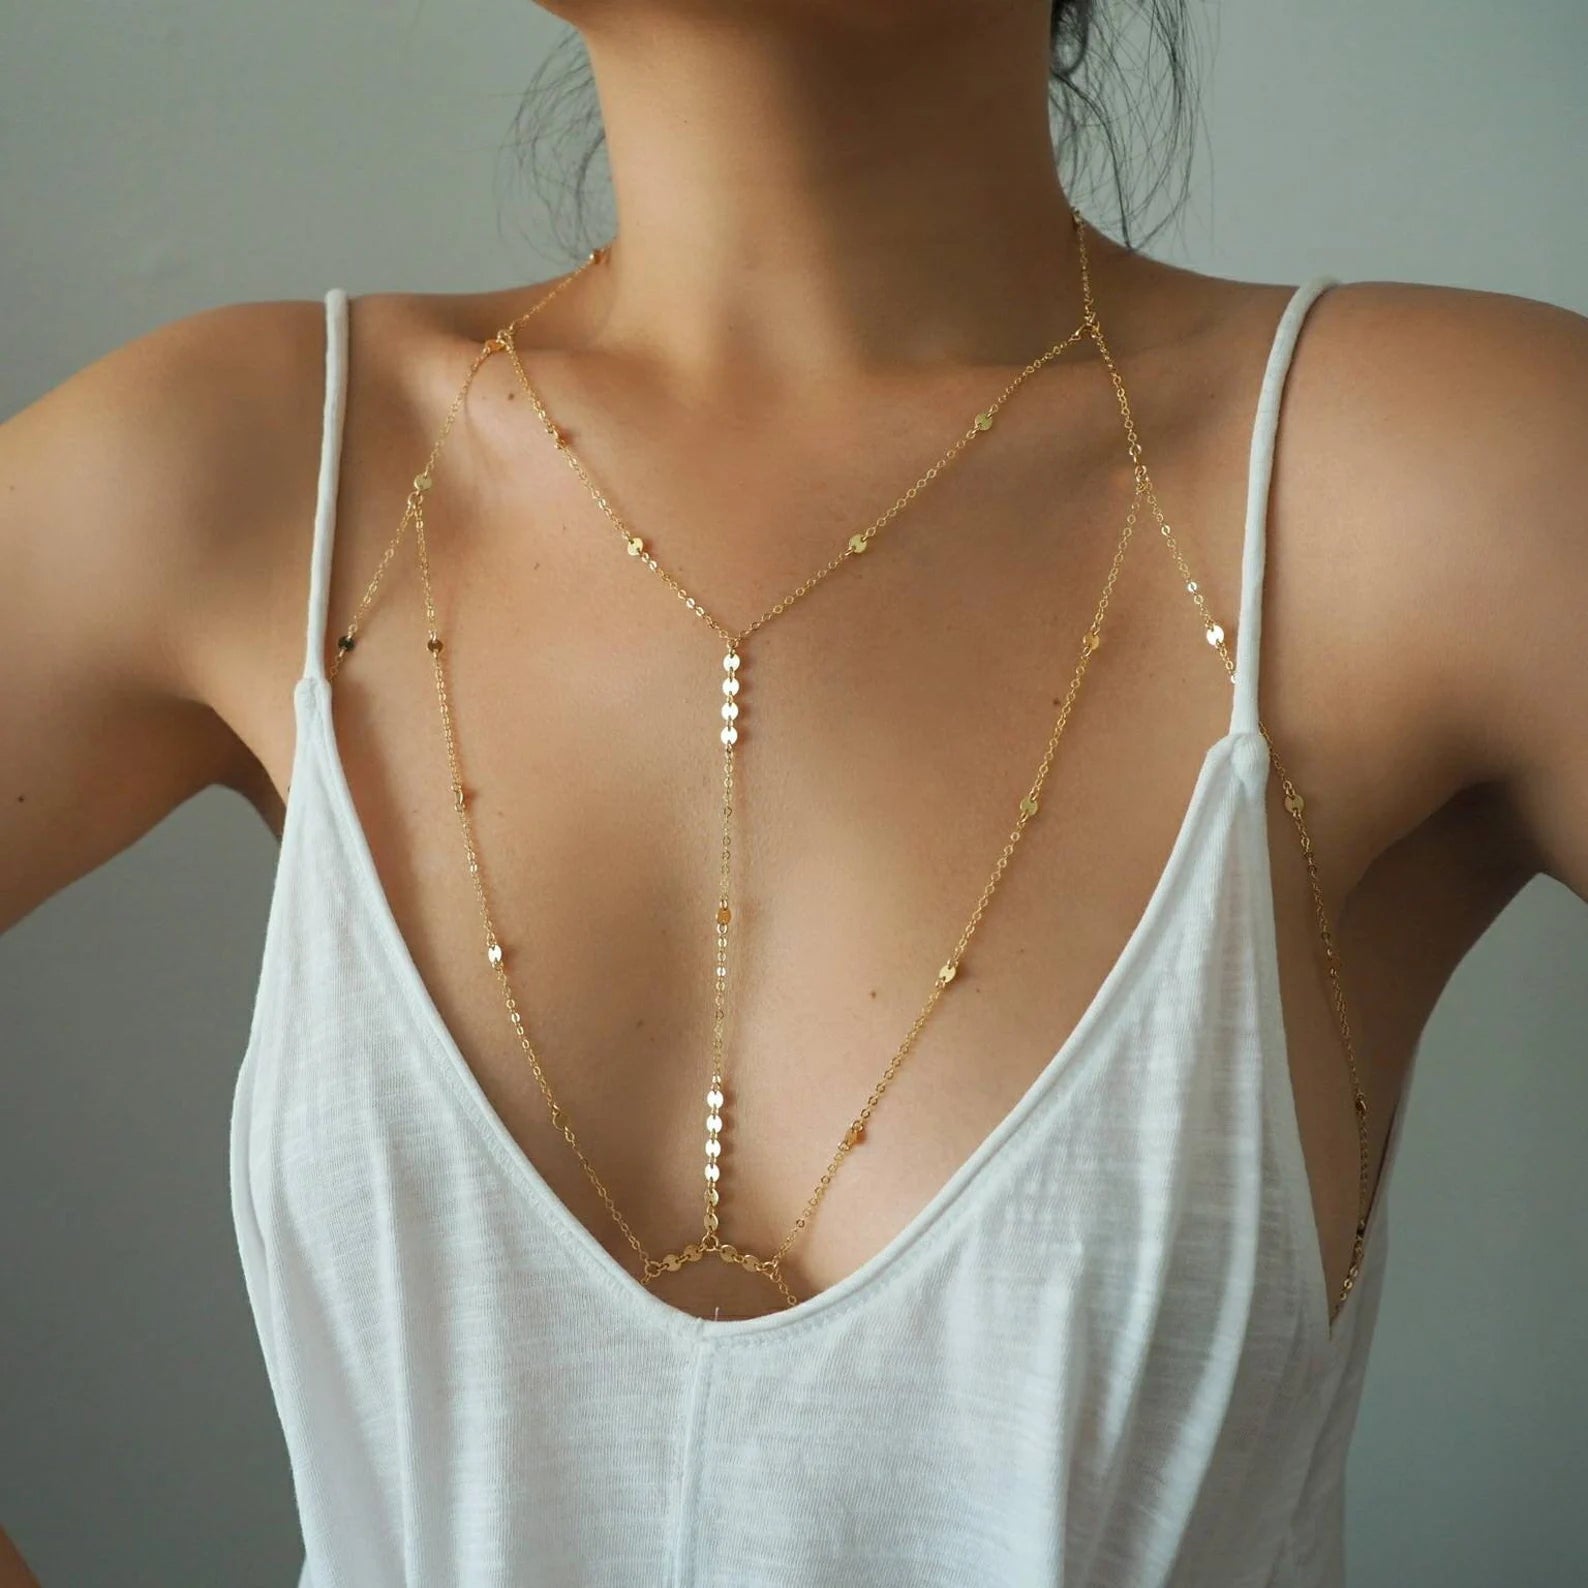 14k Gold Filled Tiny Coins T-Row Dainty Chain Bralette Halter Top Body Chain